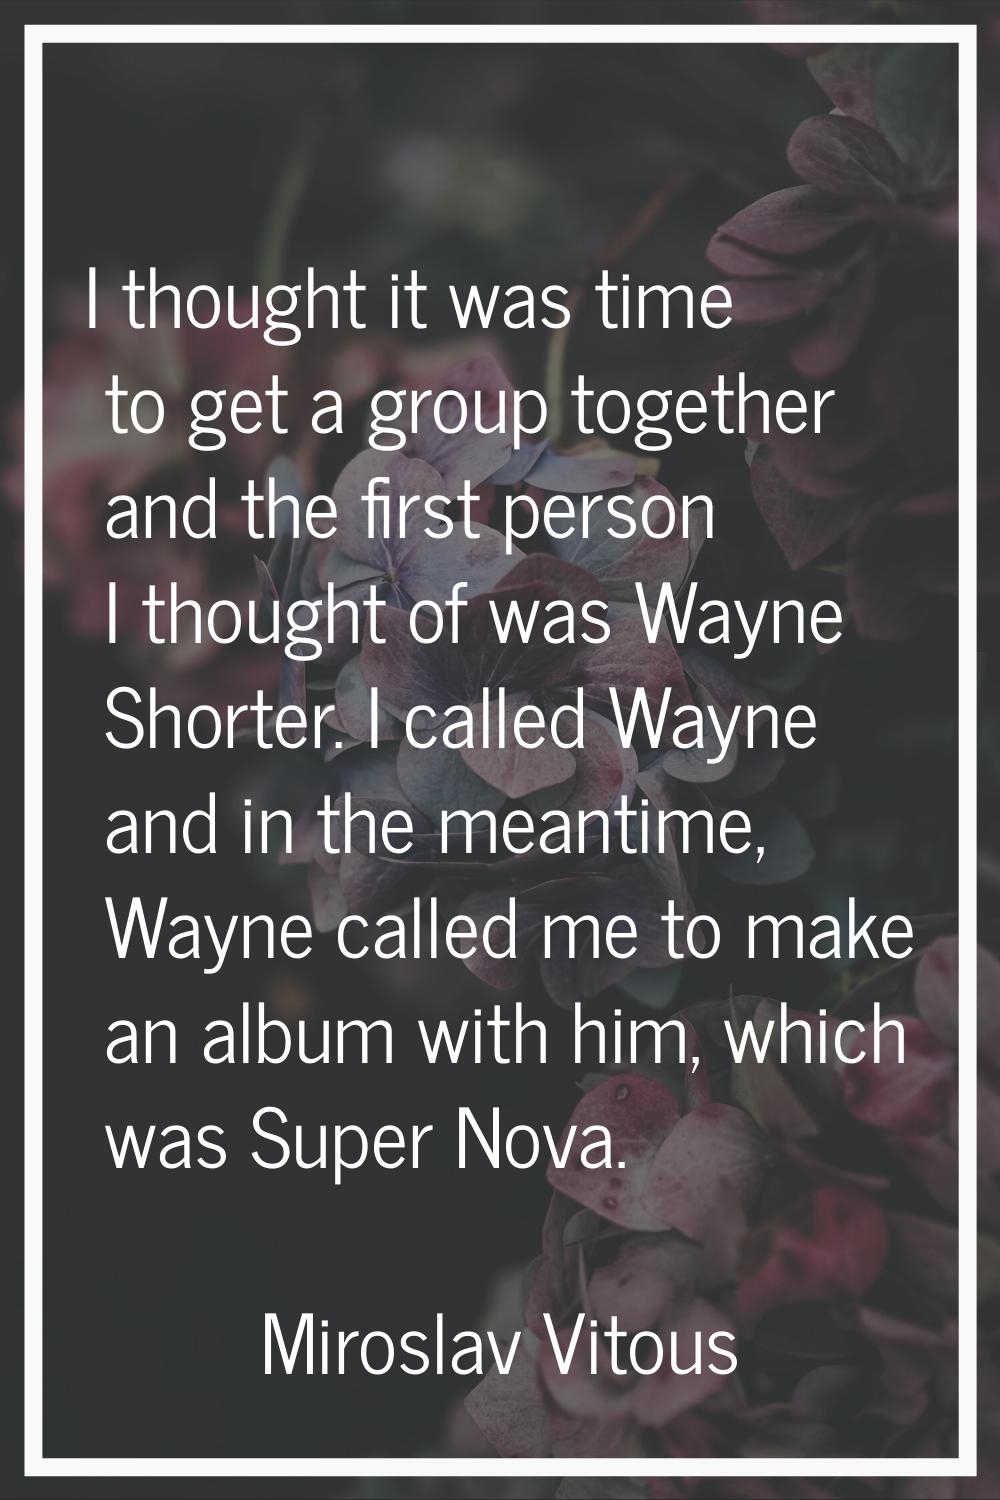 I thought it was time to get a group together and the first person I thought of was Wayne Shorter. 